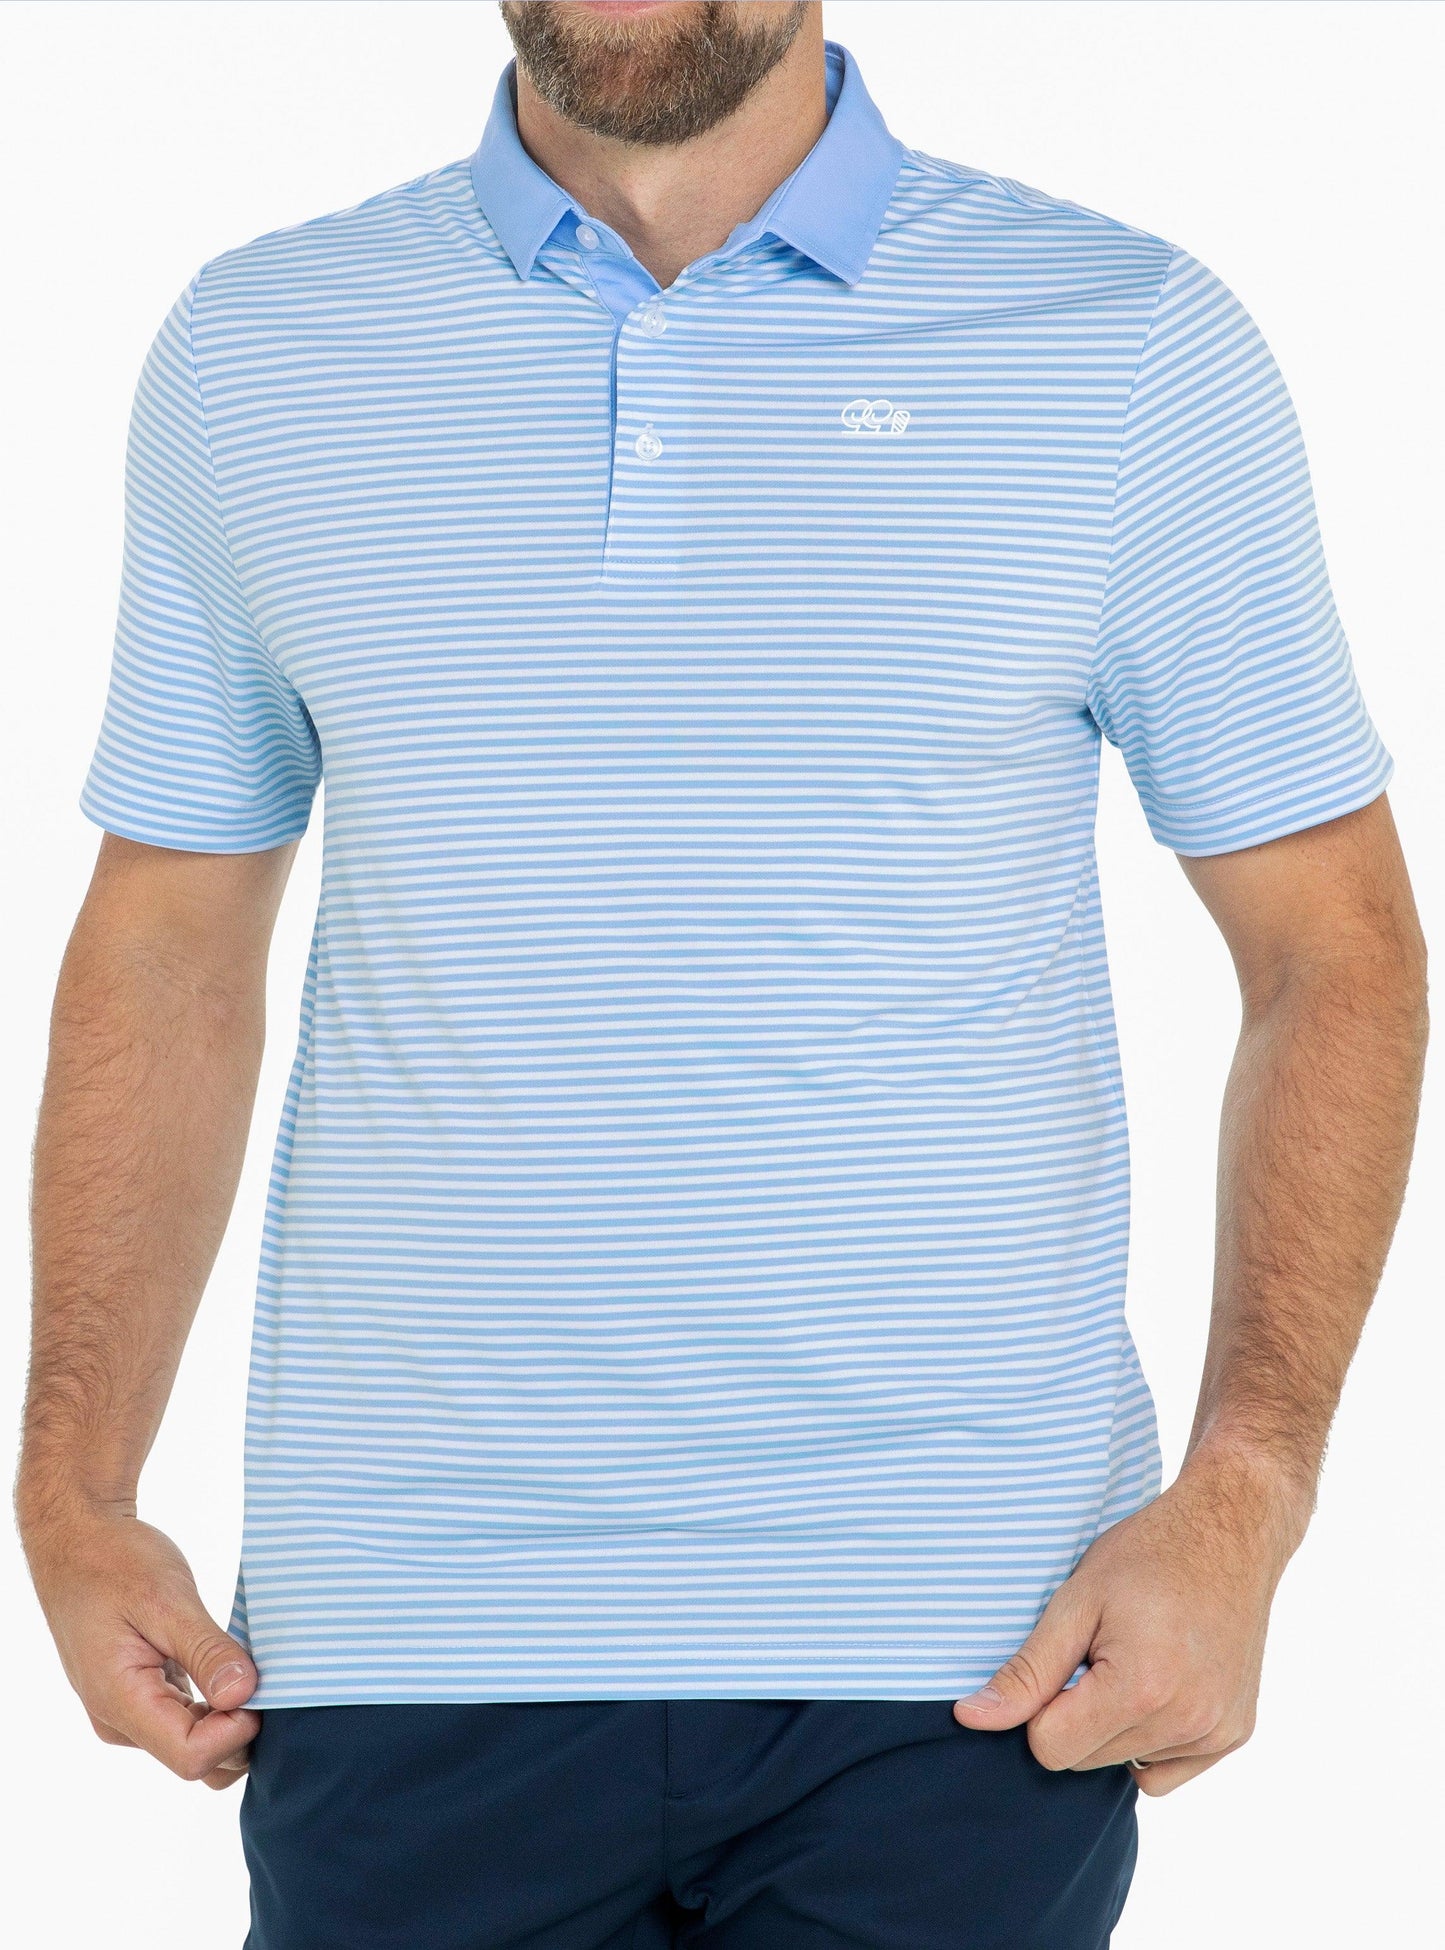 Gentleman's Polo - Spring Performance Polo by Good Good